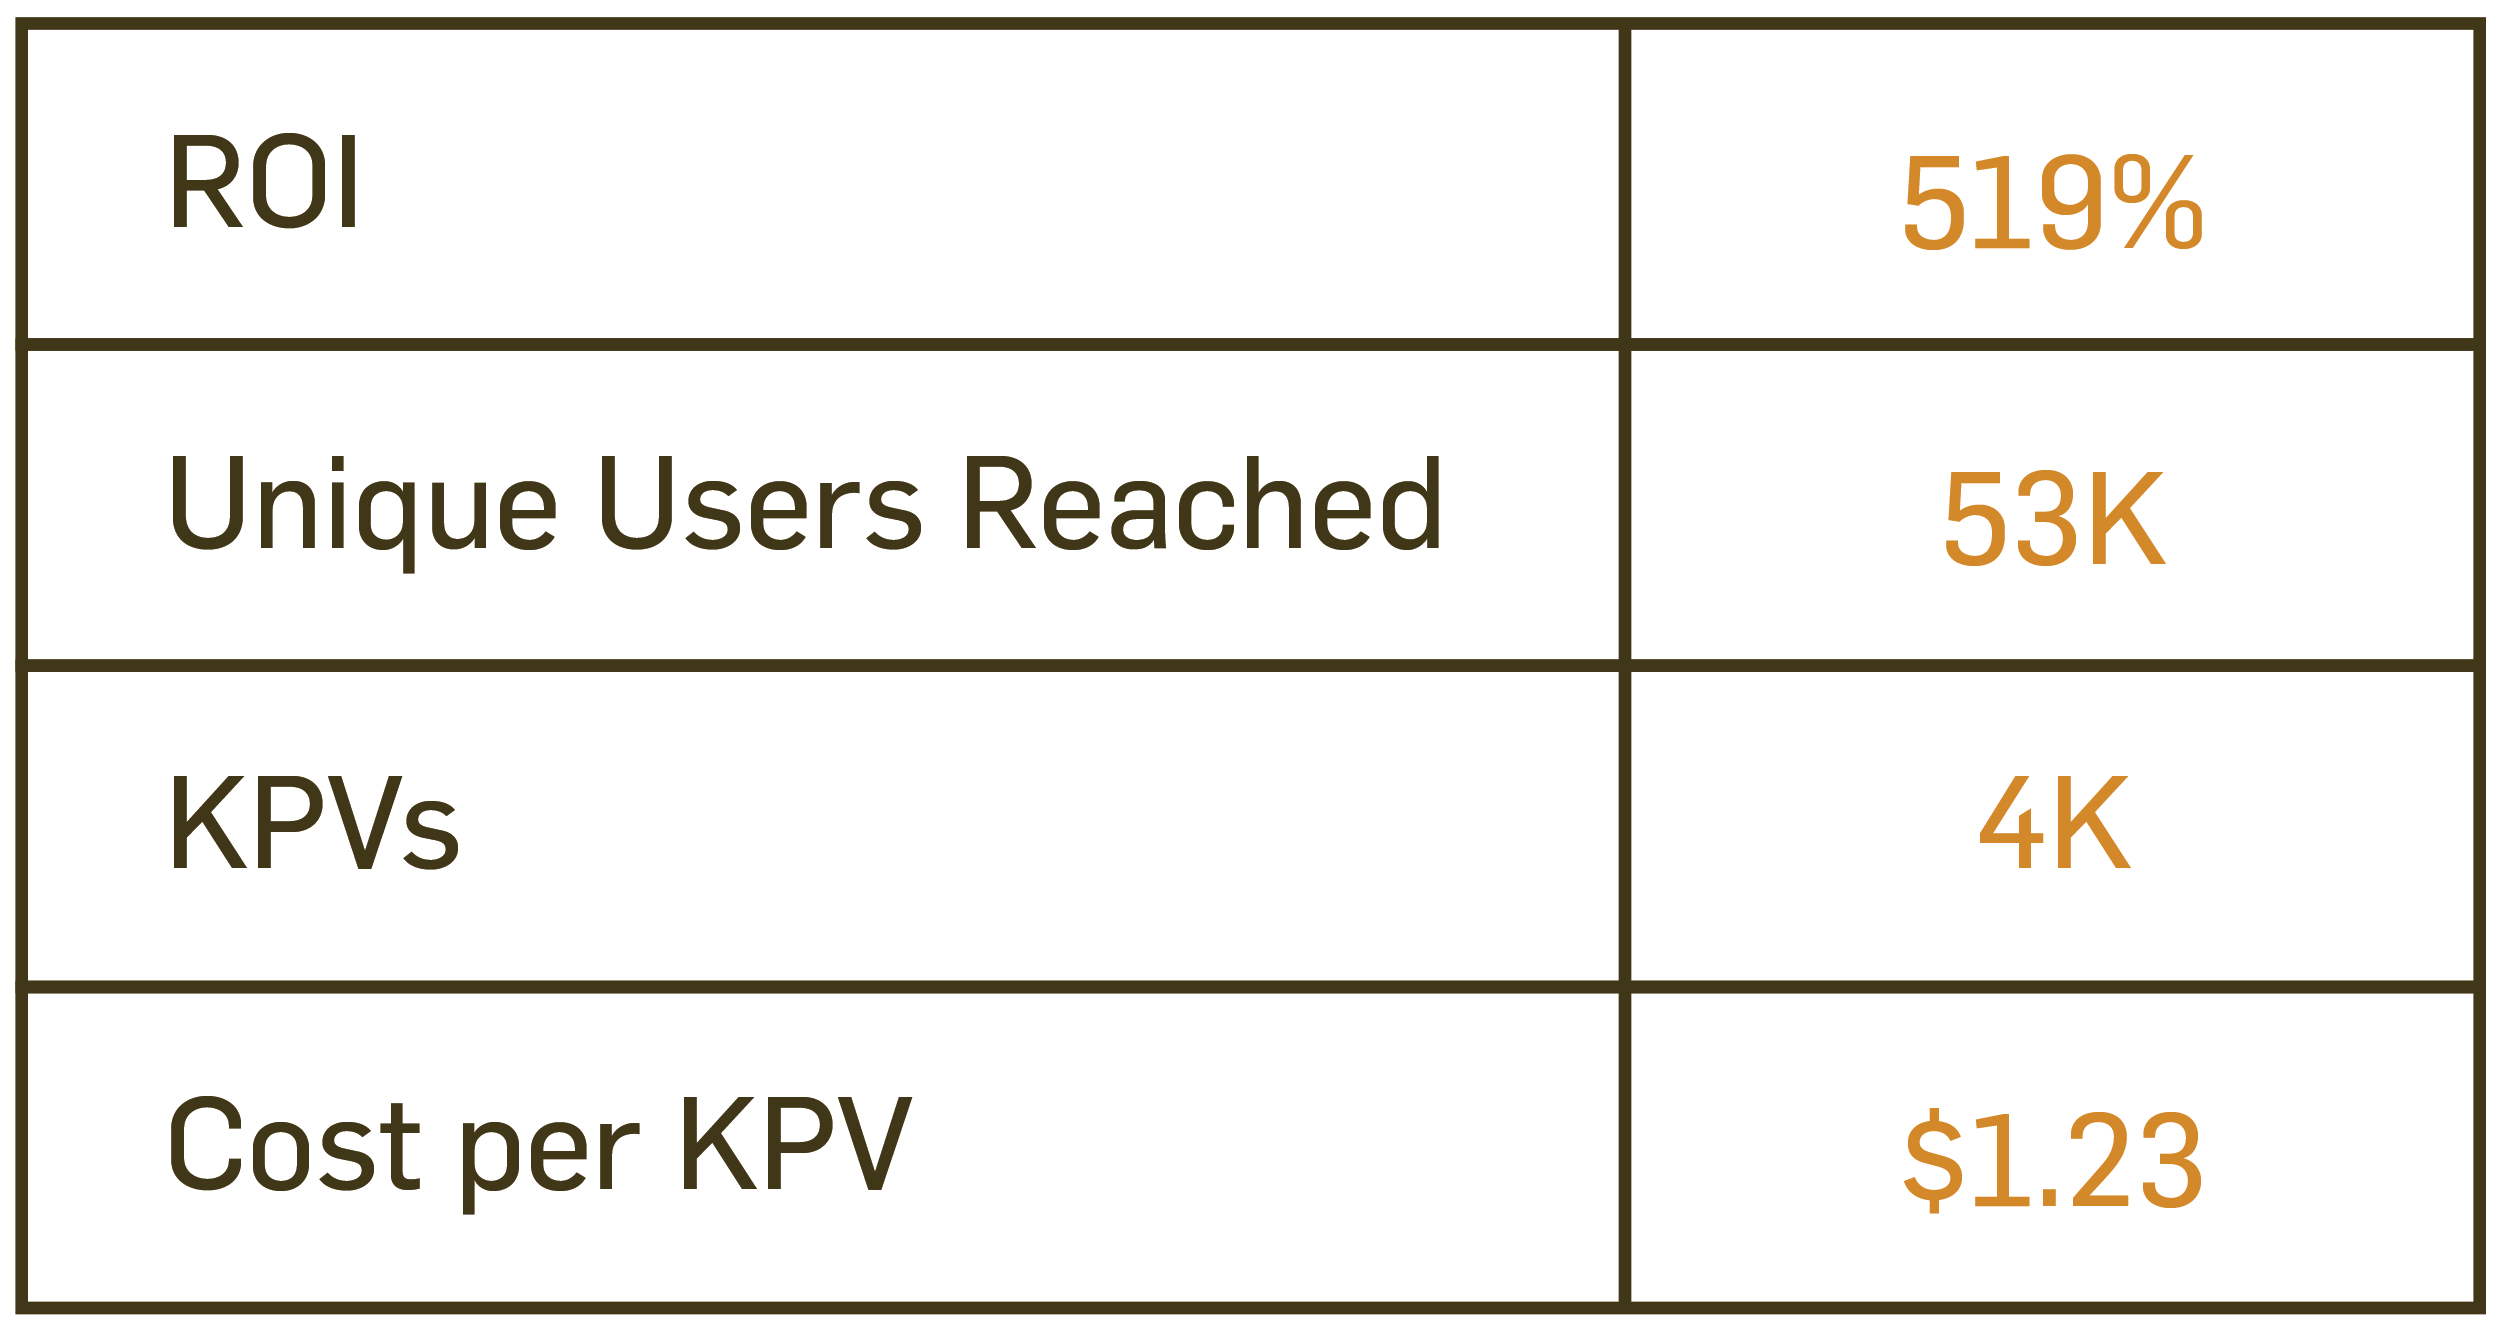 Visual depicting the ROI, unique users reached, KPVs, and cost per KPV for the campaigns